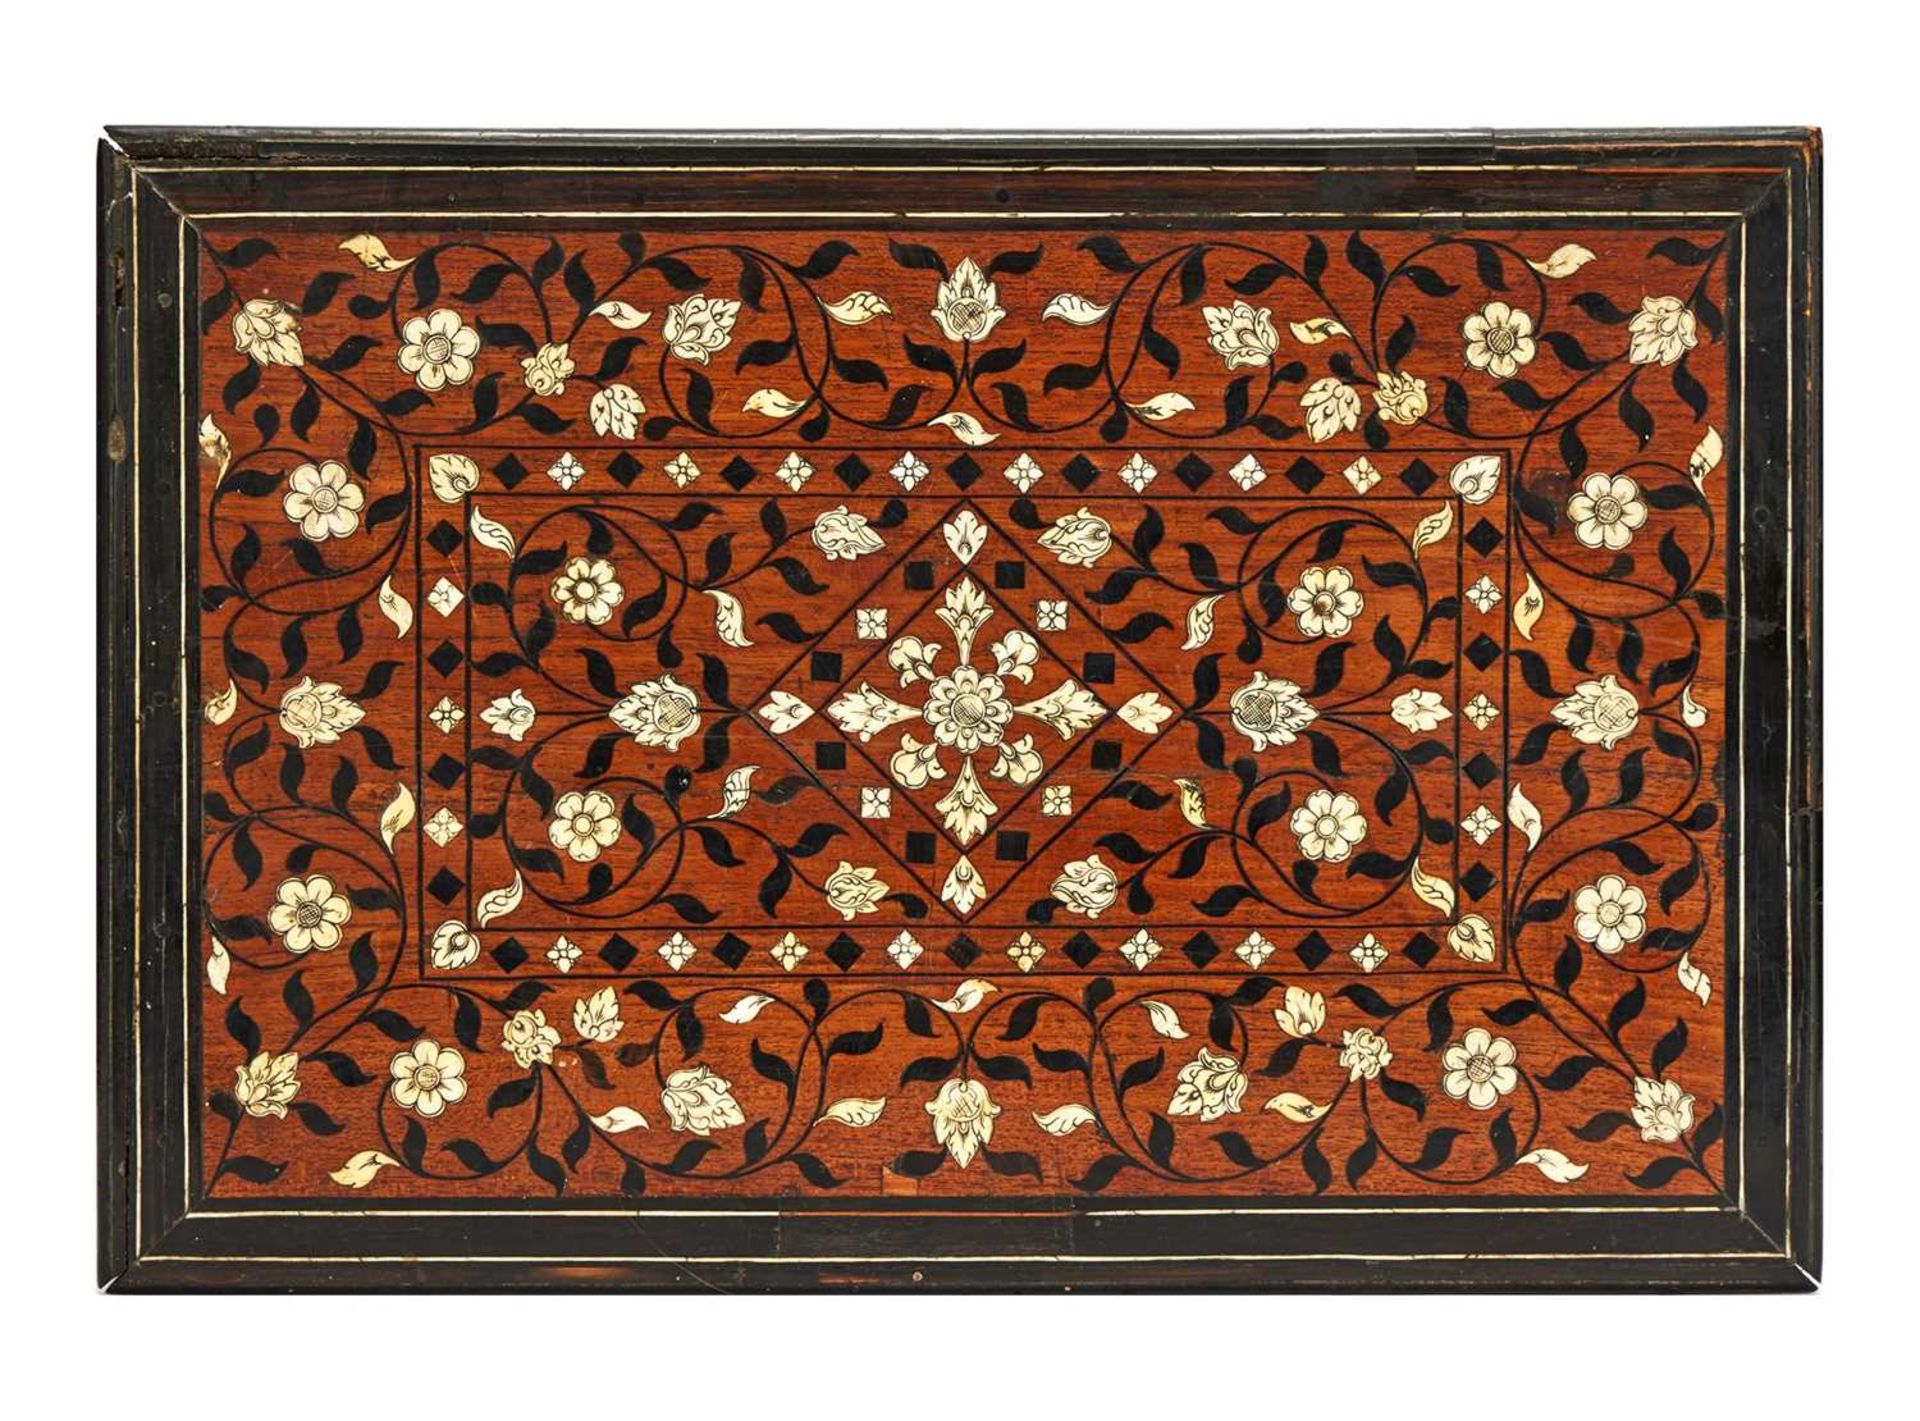 AN EARLY 18TH CENTURY ANGLO-INDIAN IVORY INLAID WORK BOX, PROBABLY GUJARAT - Bild 2 aus 2